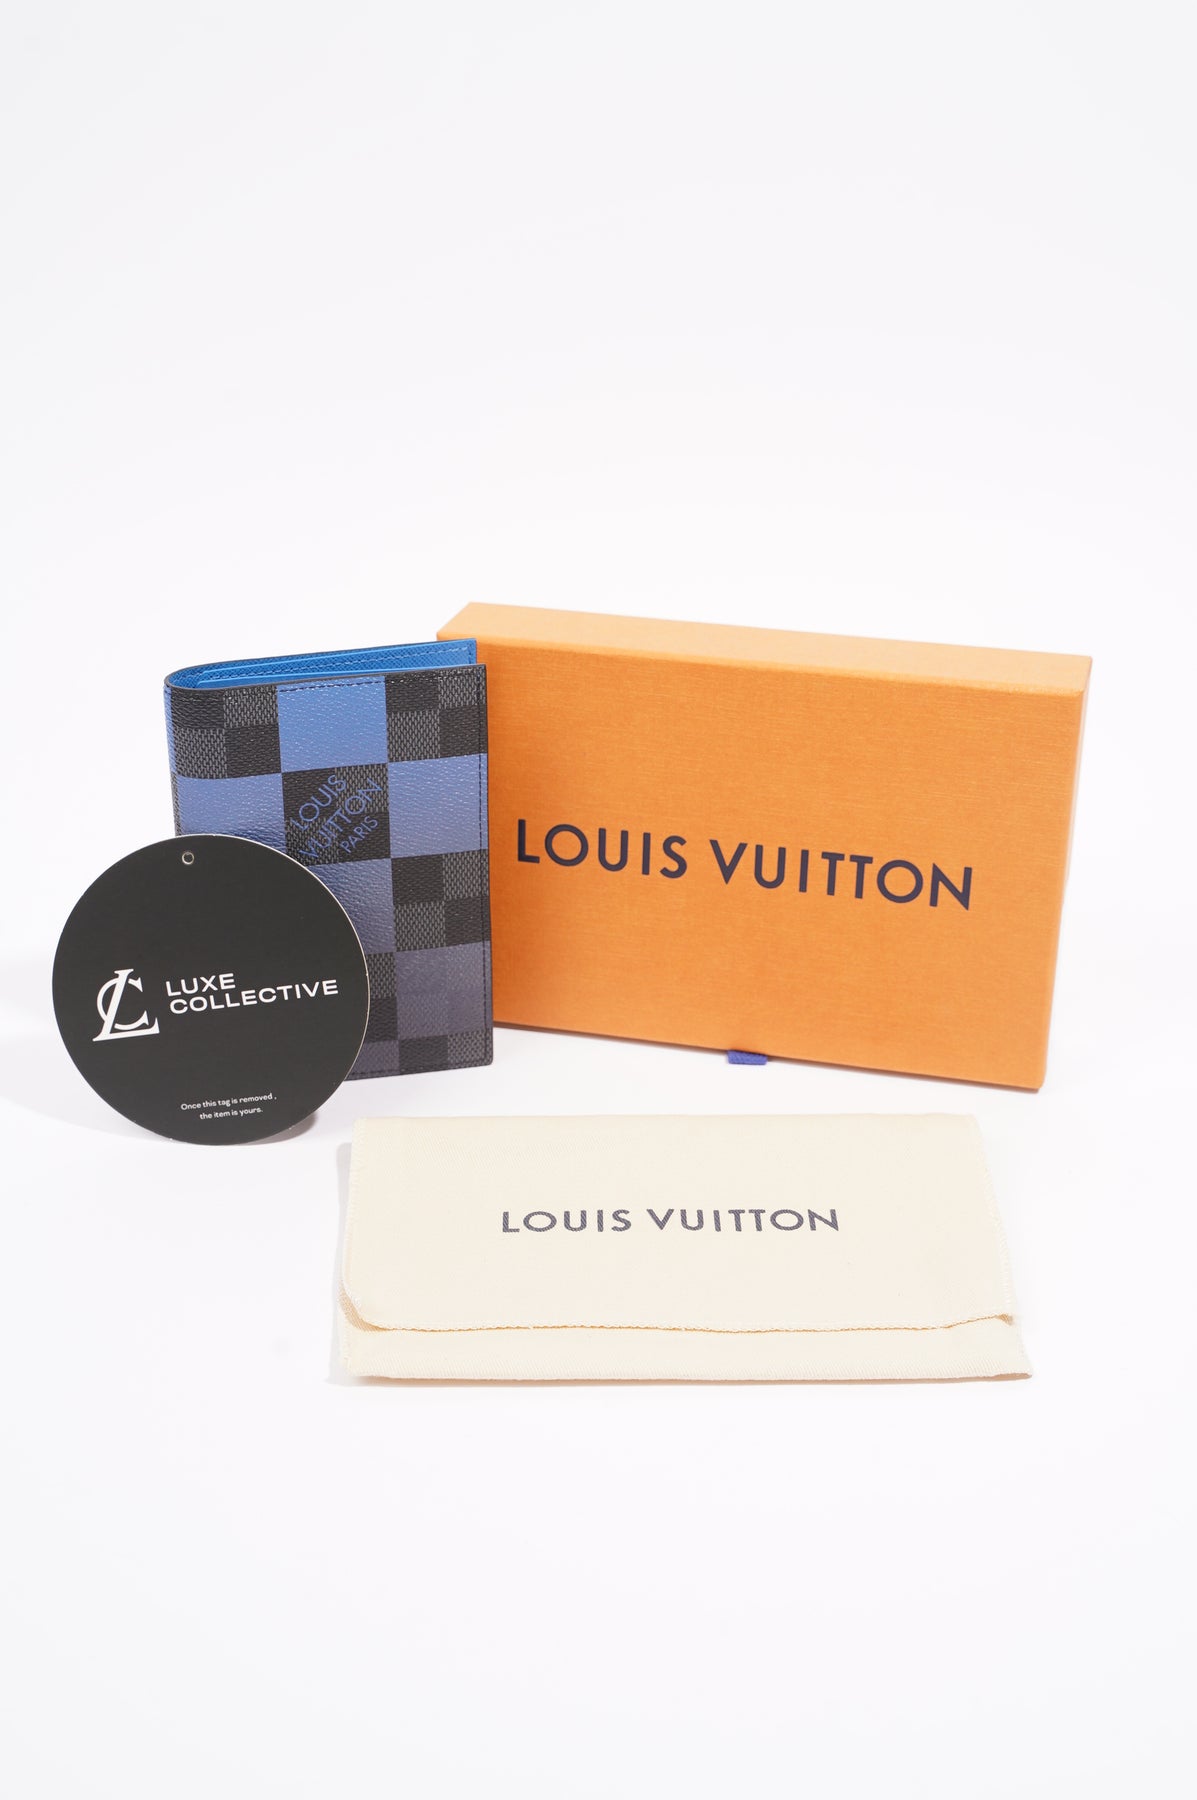 Louis Vuitton Passport cover for women  Buy or Sell your wallet  accessories - Vestiaire Collective